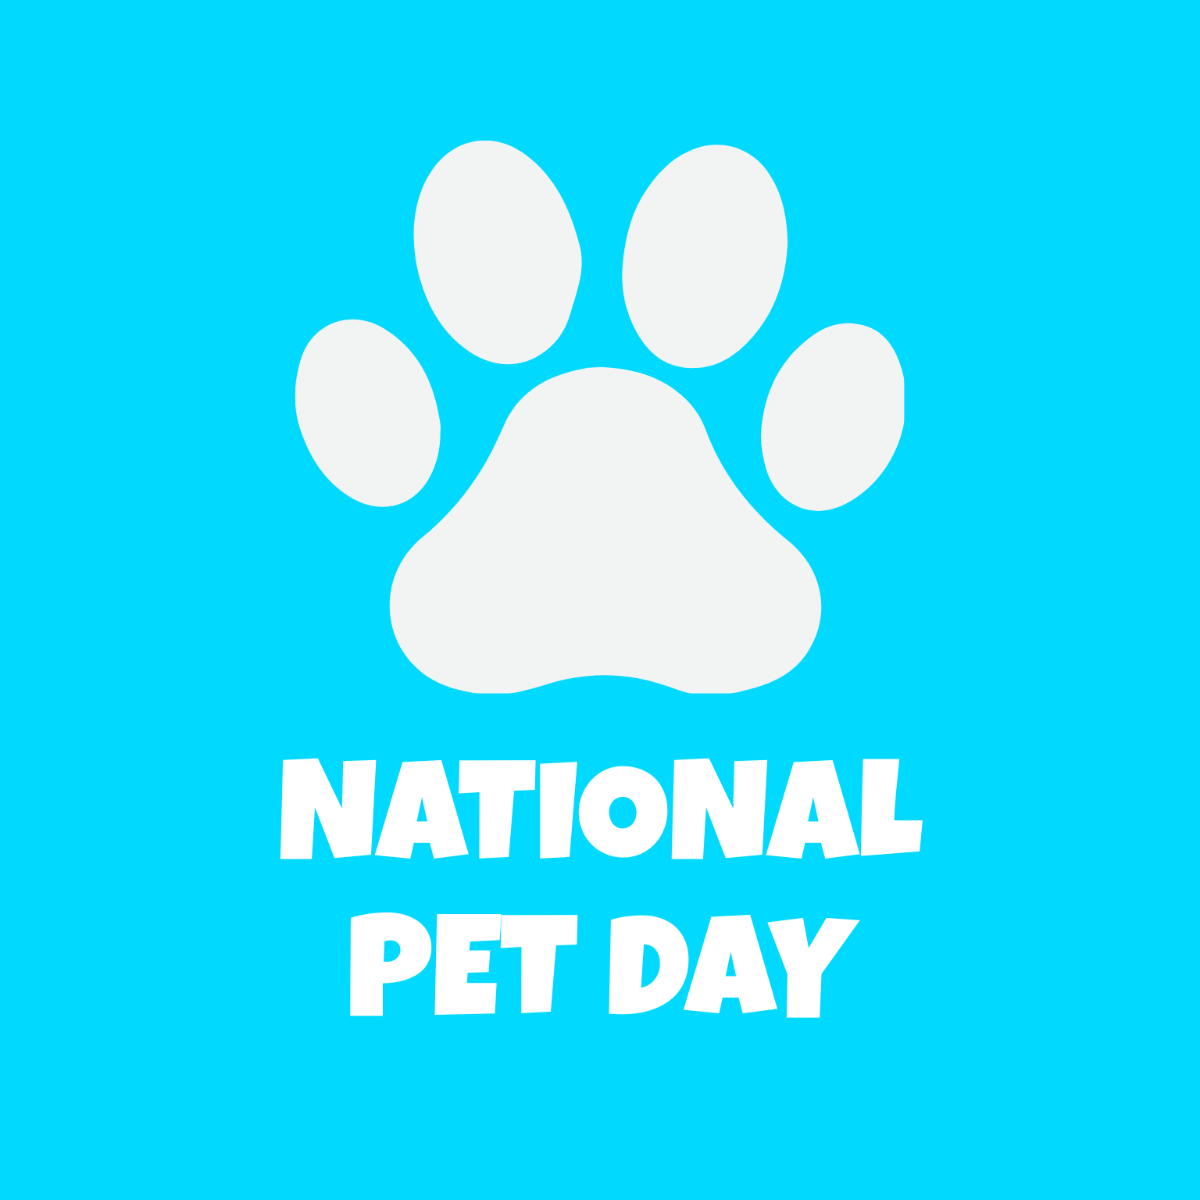 National Pet Day Sign Vector